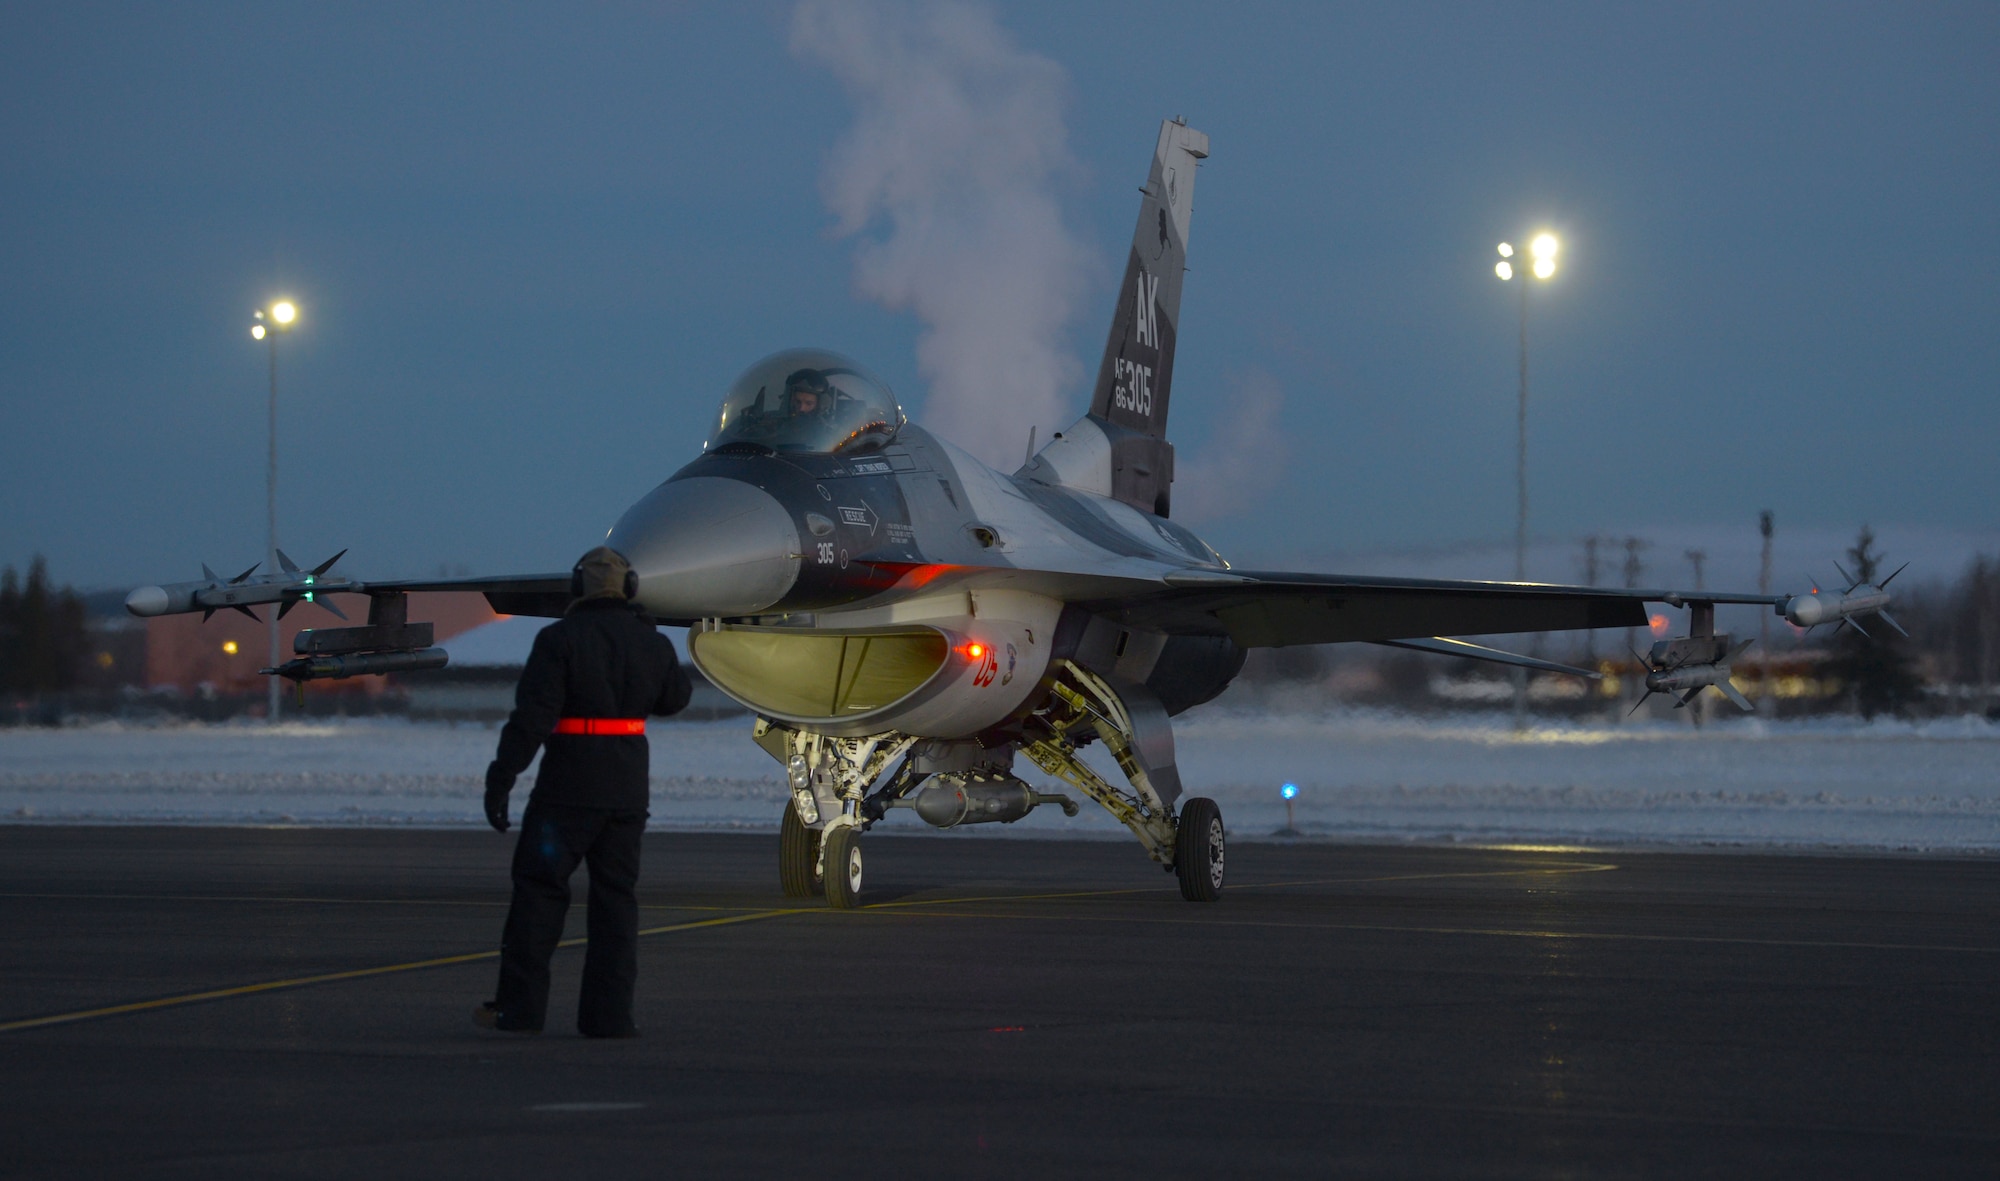 A U.S. Air Force Airman assigned to the 354th Maintenance Group inspects a U.S. Air Force F-16 Fighting Falcon intake for ice build up prior to launch for an elephant walk on Eielson Air Force Base, Alaska, Dec. 18, 2020.